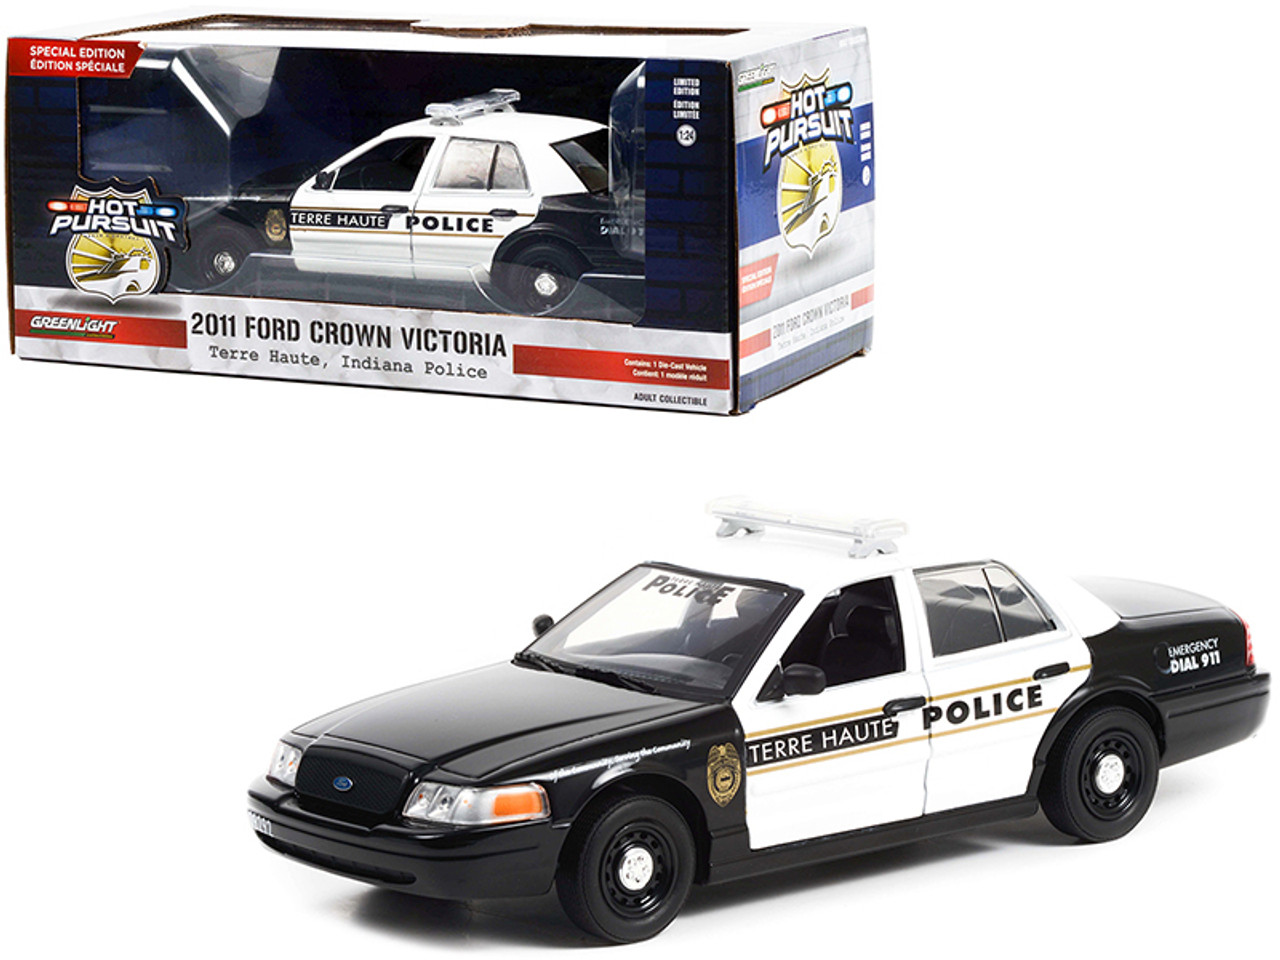 2011 Ford Crown Victoria Police Interceptor Black and White "Terre Haute Police" (Indiana) "Hot Pursuit Special Edition" 1/24 Diecast Model Car by Greenlight